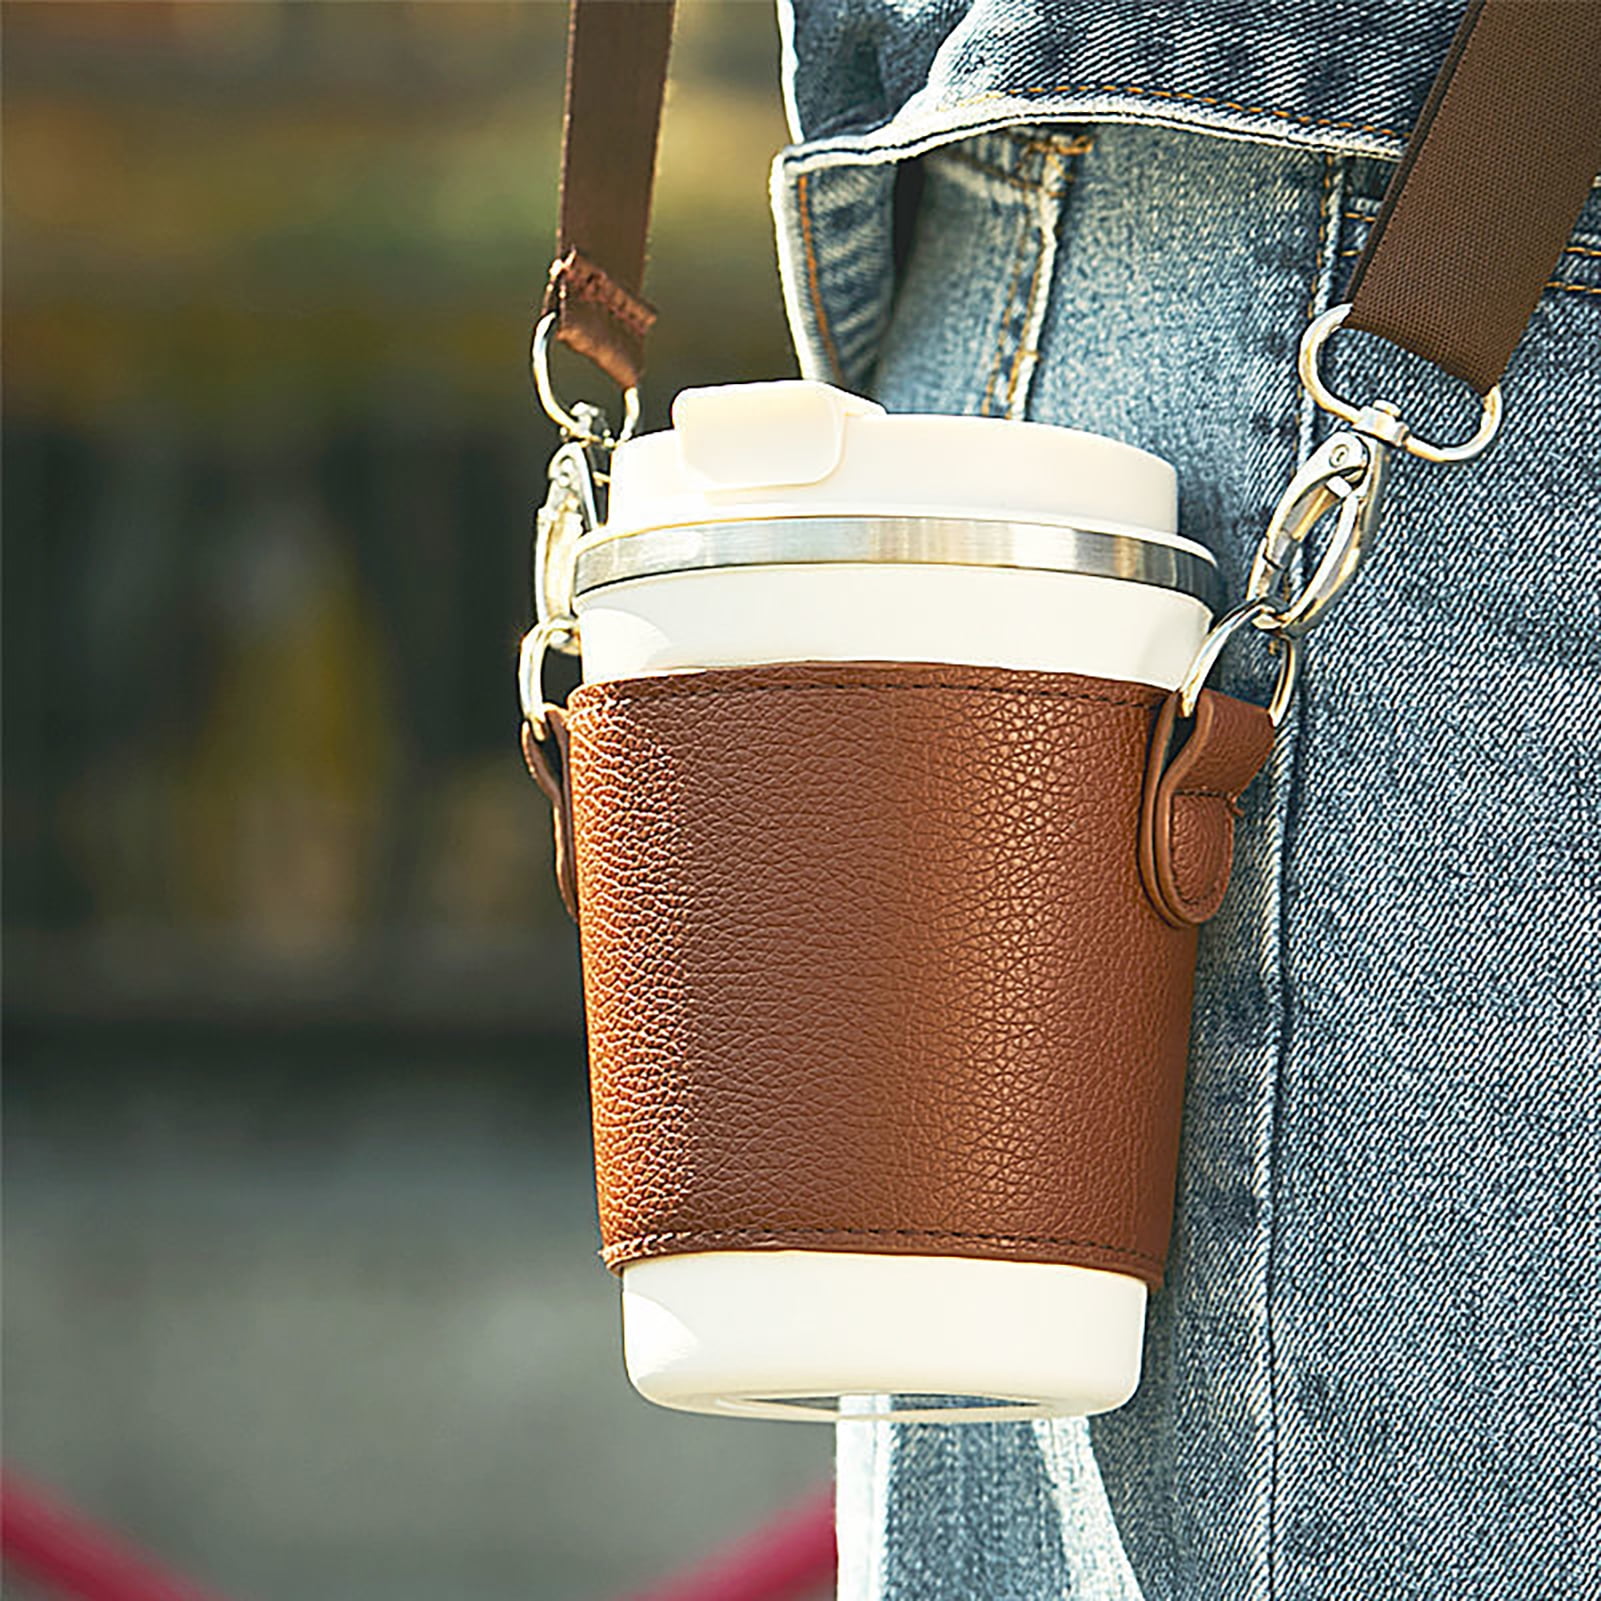 Portable Simulated Leather Coffee Mug Carrier, Lightweight